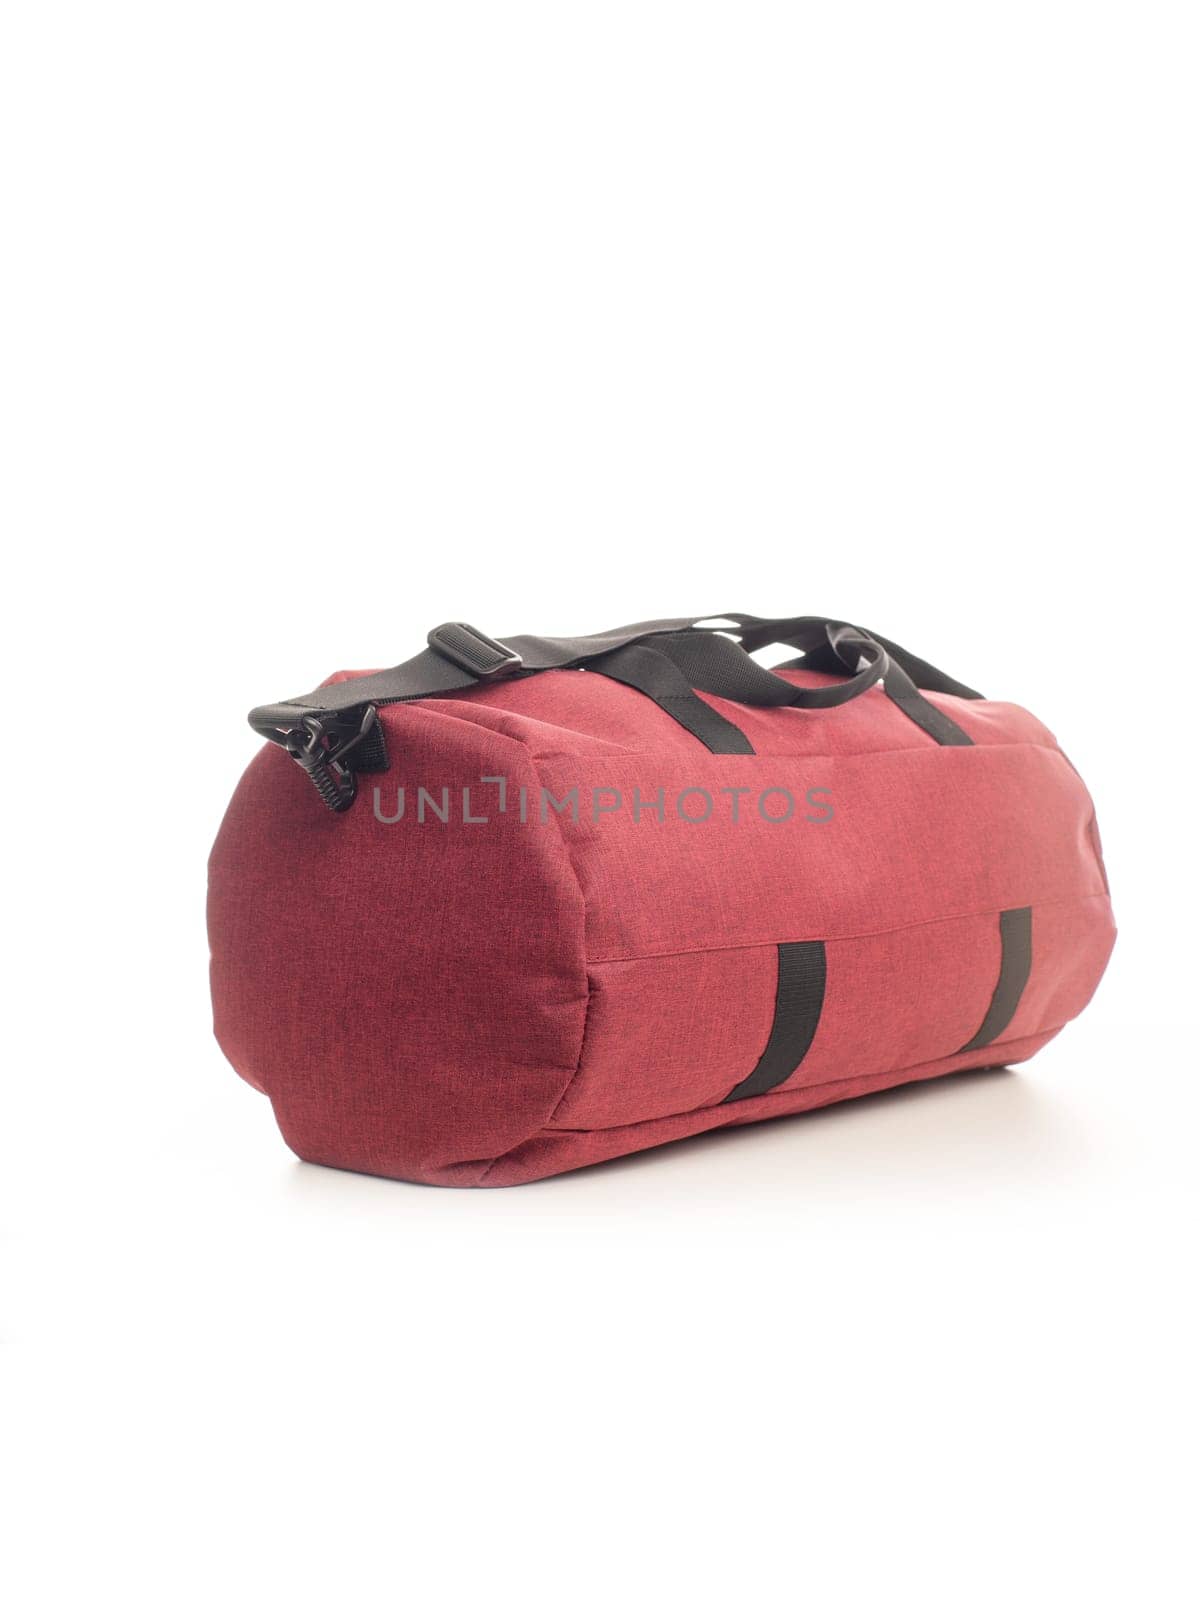 Sport bag isolated on the white background by zartarn